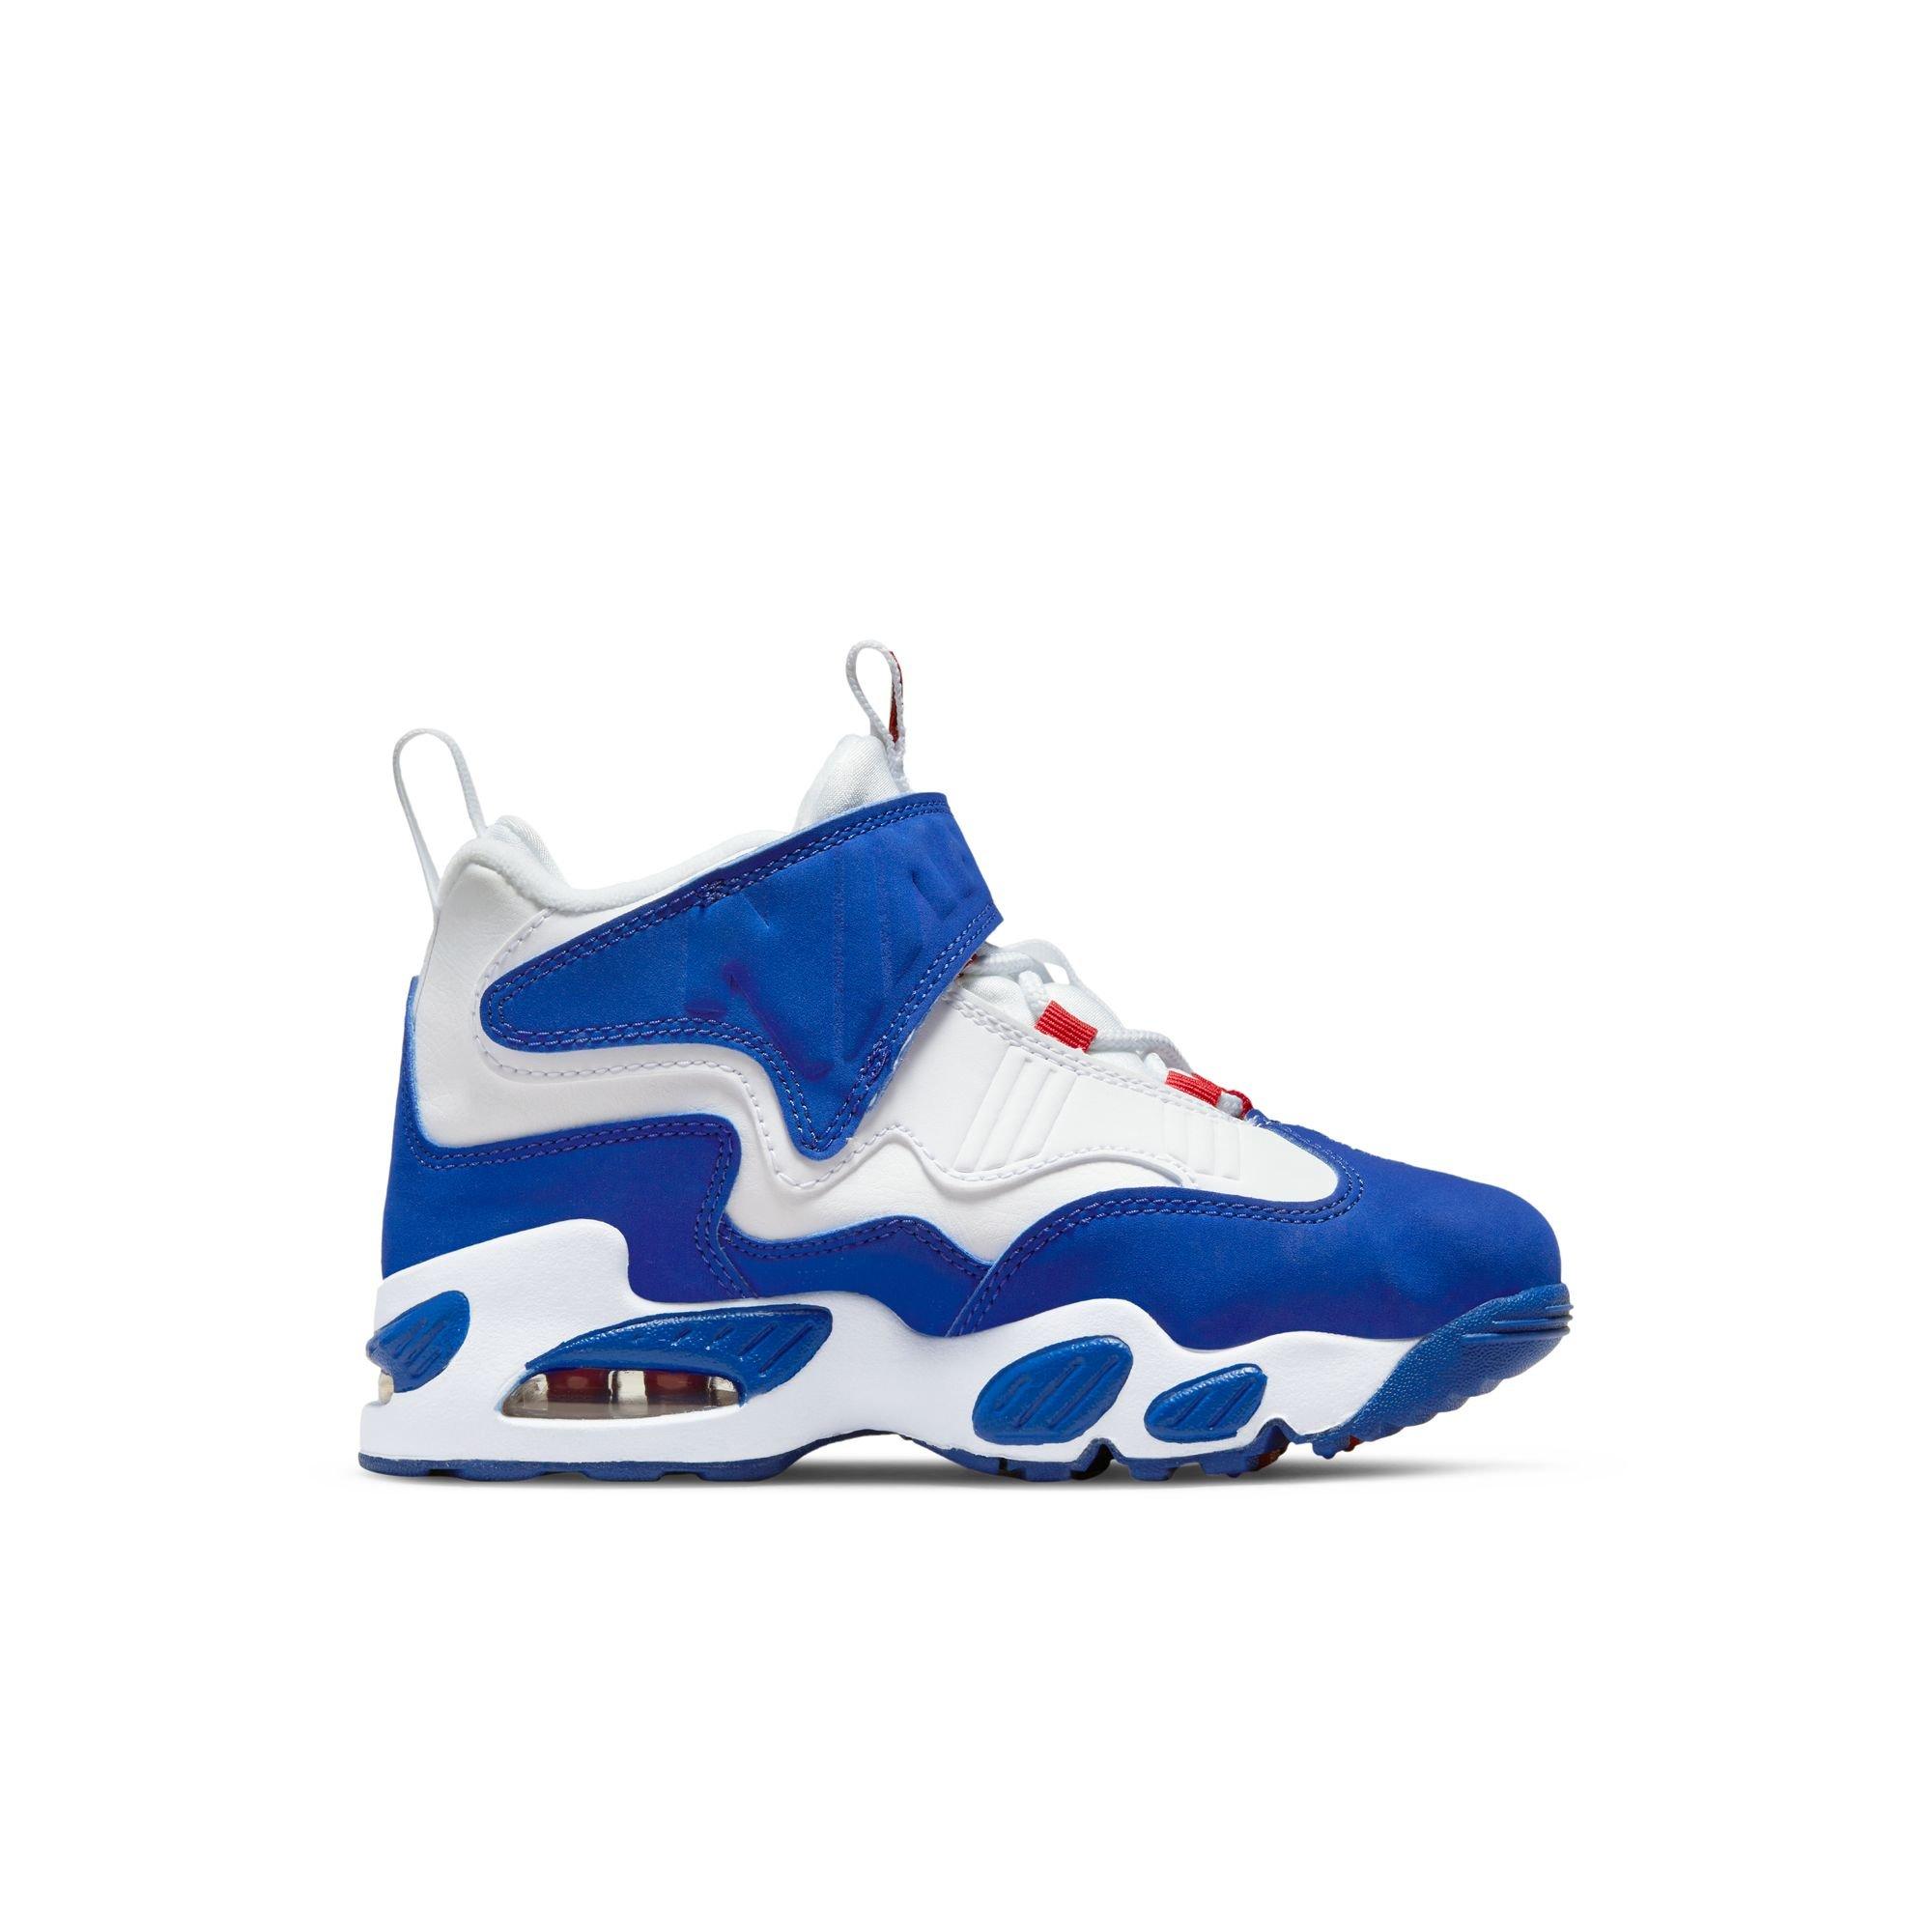 USA Nike Air Griffey 1 Cleats 10